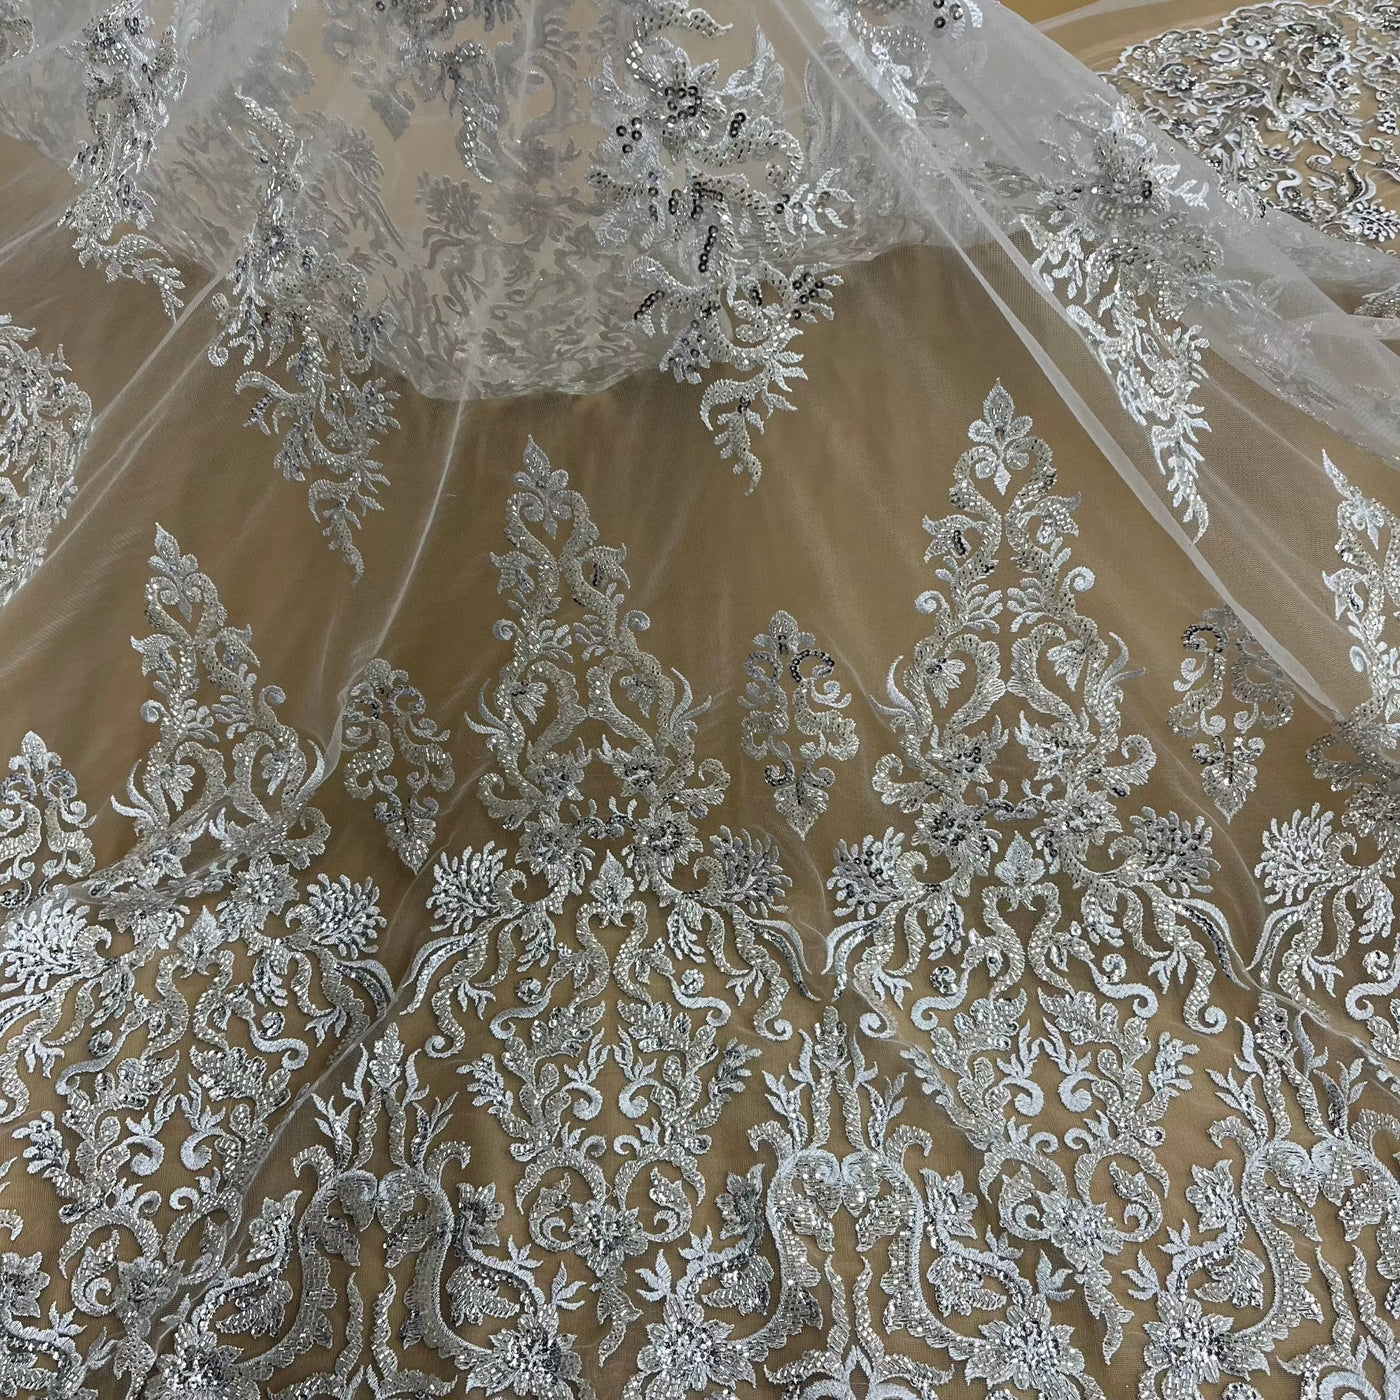 Beaded & Sequined Lace Fabric Embroidered on 100% Polyester Net Mesh | Lace USA - GD-13314 Silver